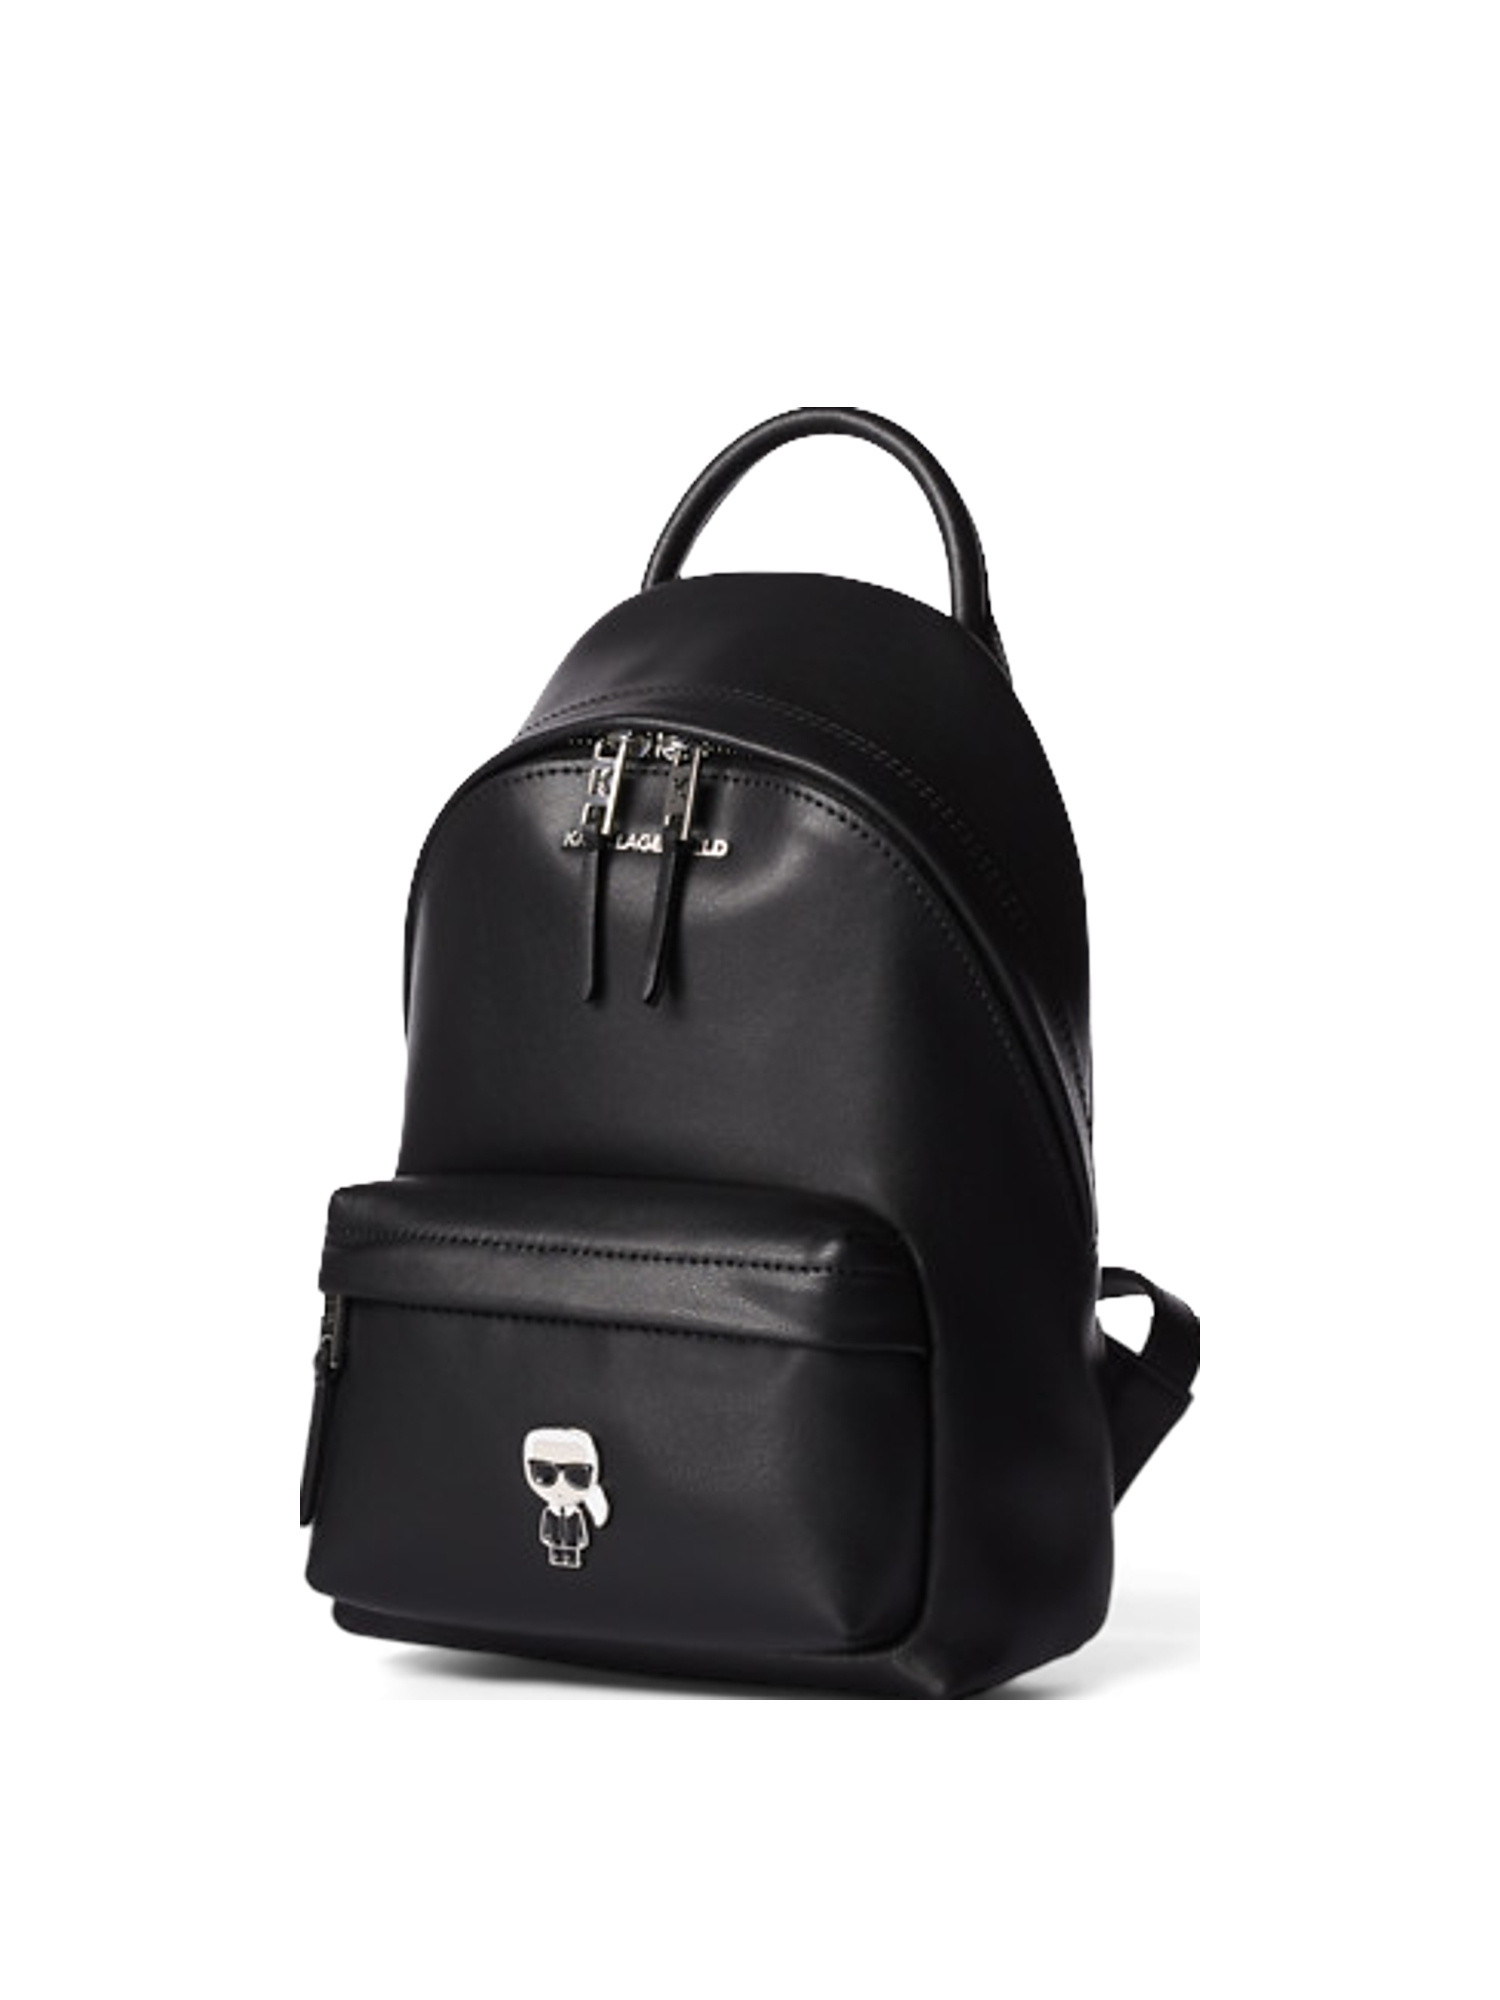 Karl Lagerfeld - Backpack with metal pin, Black, large image number 0